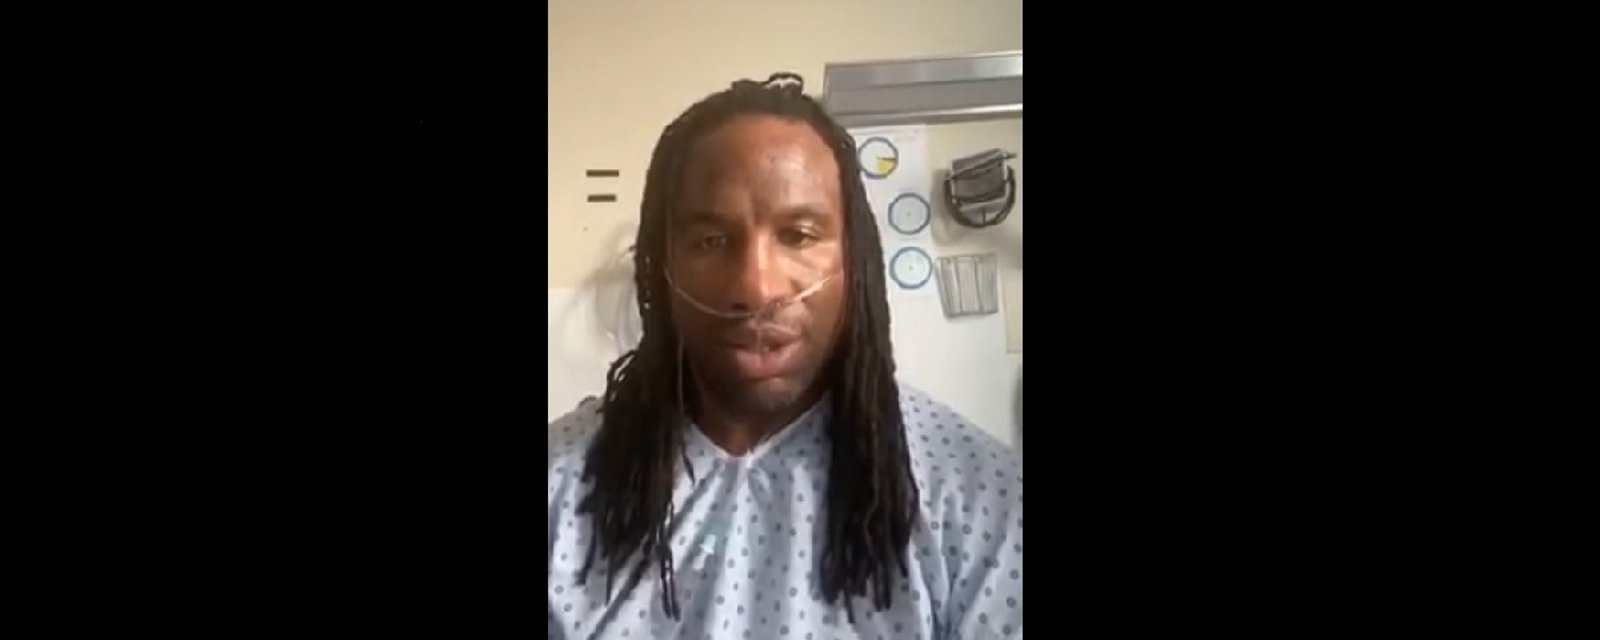 Georges Laraque sends a message from his hospital bed.